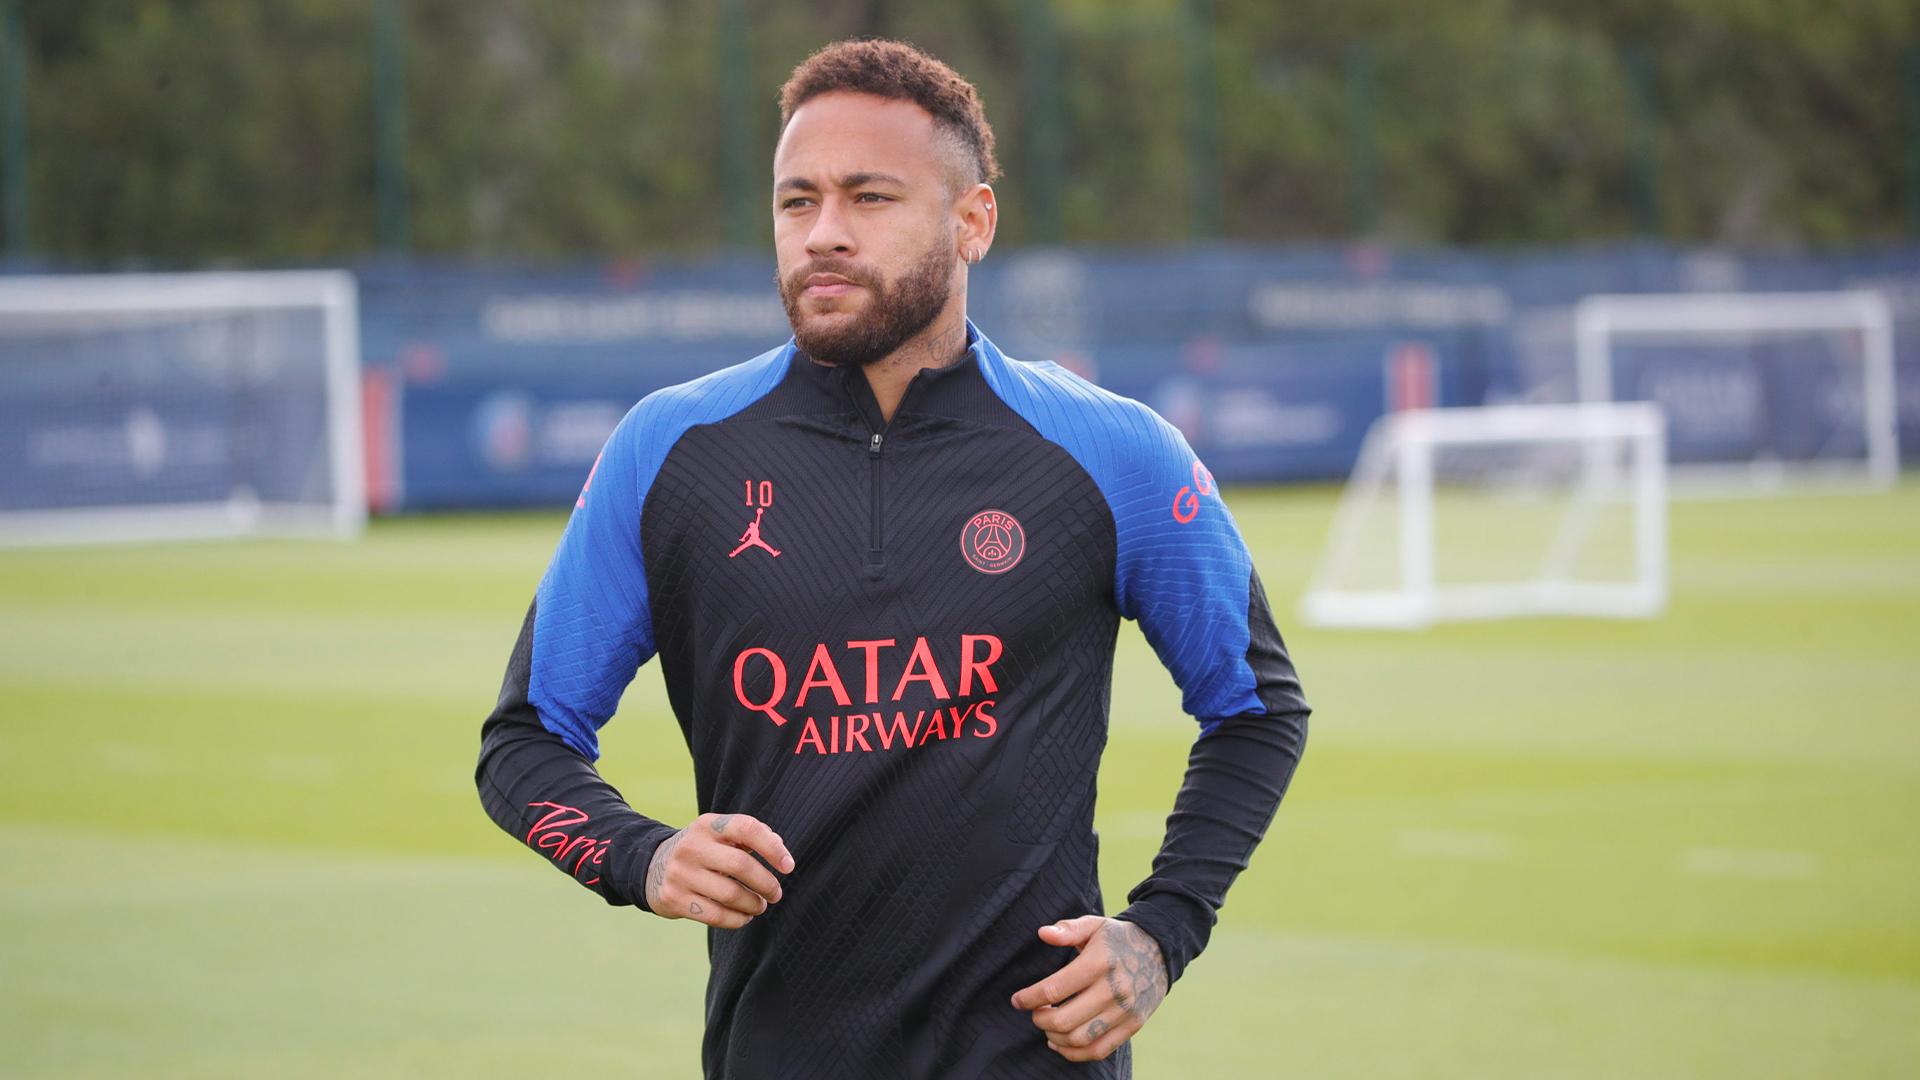 Always considered Neymar to be one of best players on planet, gushes Christophe Galtier